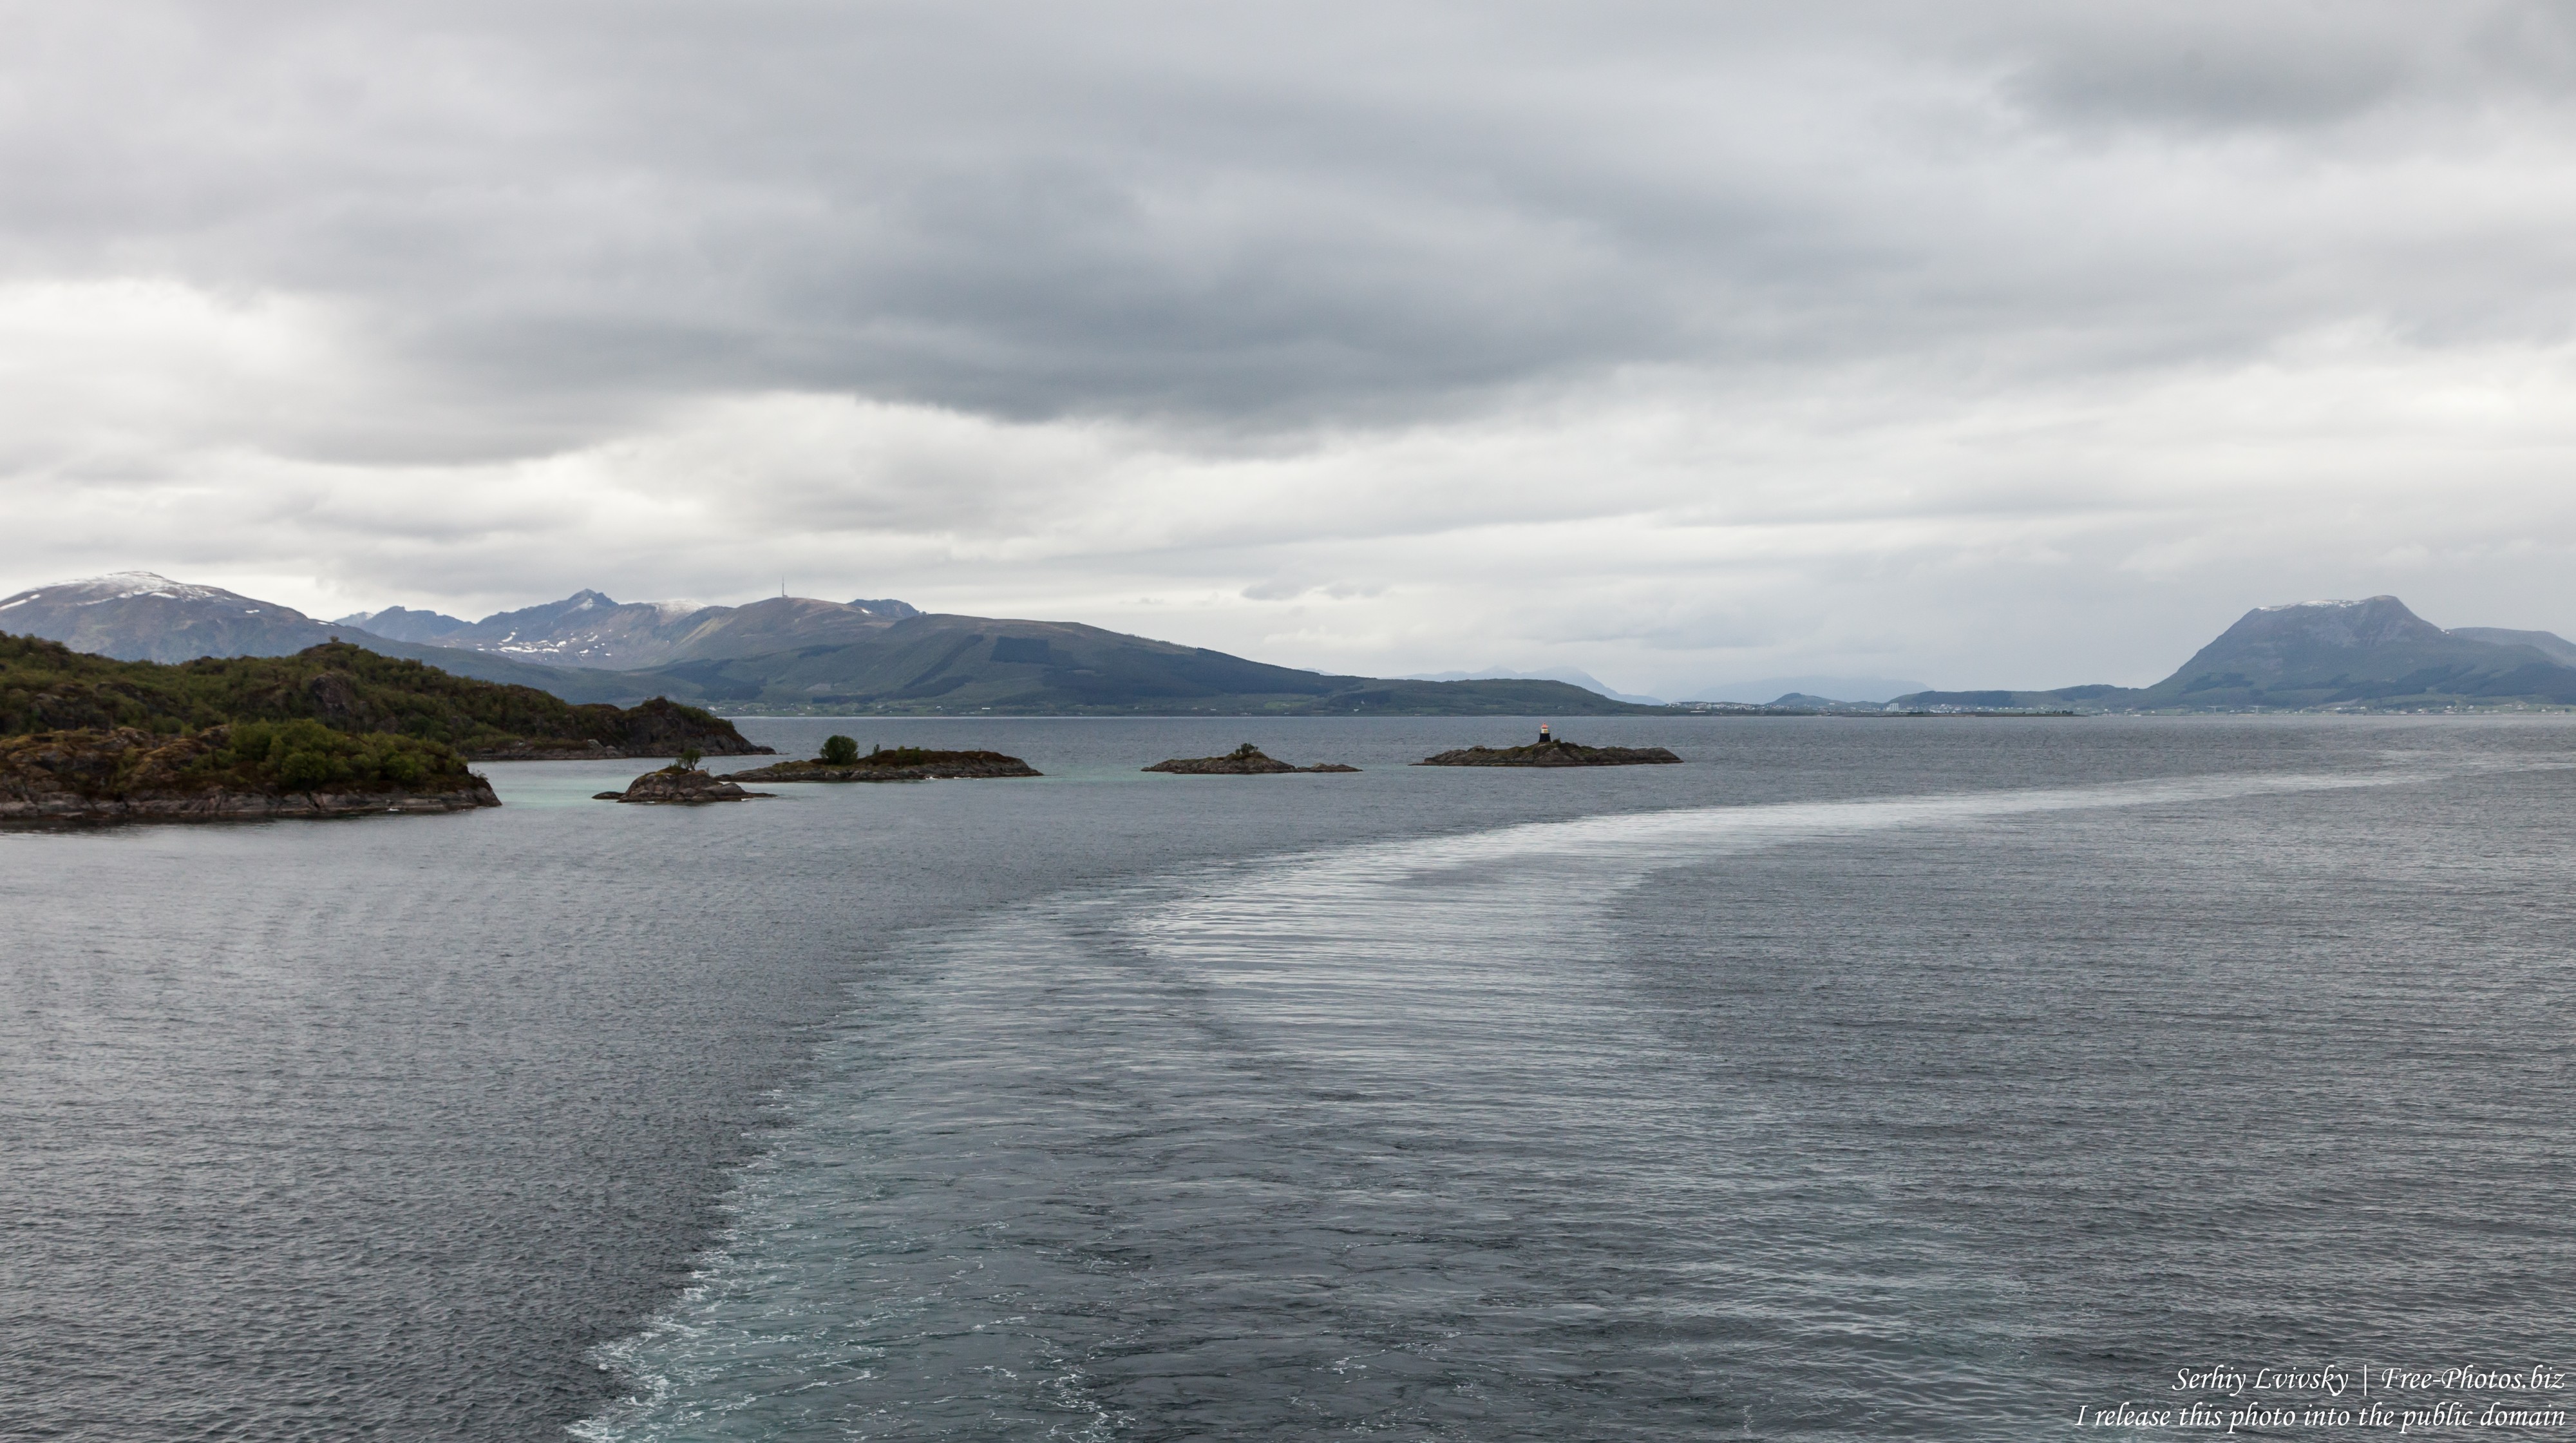 way from Stokmarknes to Trollfjord, Norway, photographed in June 2018 by Serhiy Lvivsky, picture 4